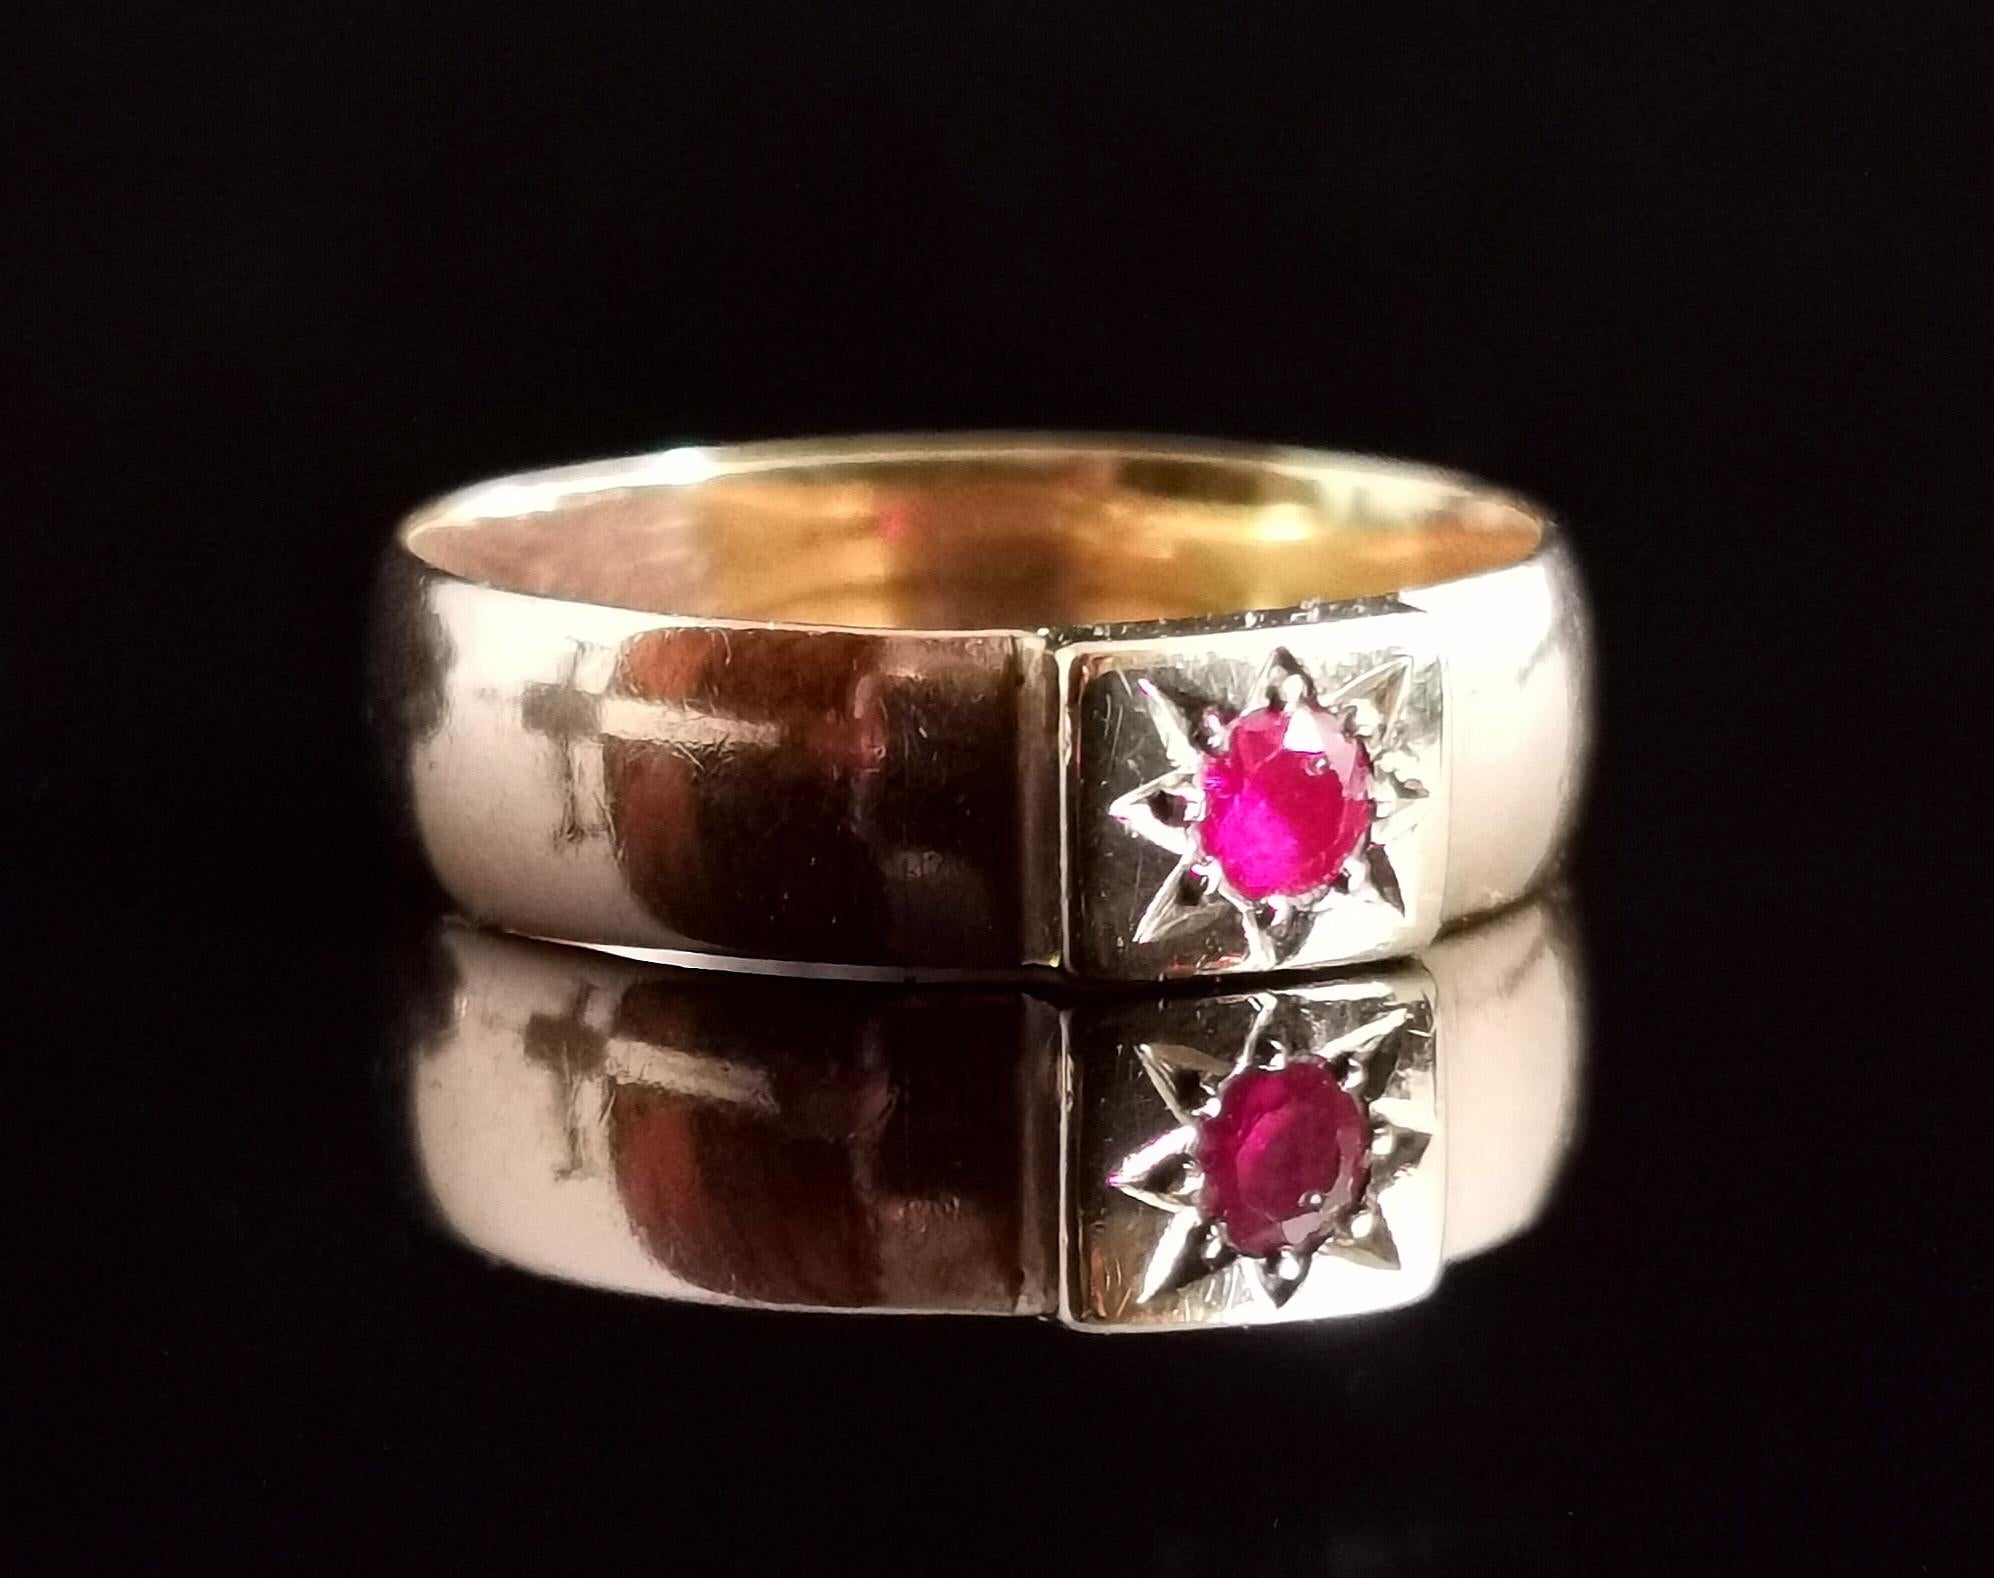 A beautiful antique early Art Deco era chunky 9 karat yellow gold band ring.

The ring has a nice wide old gold band with a light D profile, the face has a raised square panel gypsy or star set with a vibrant pinky synthetic Ruby.

A gorgeous